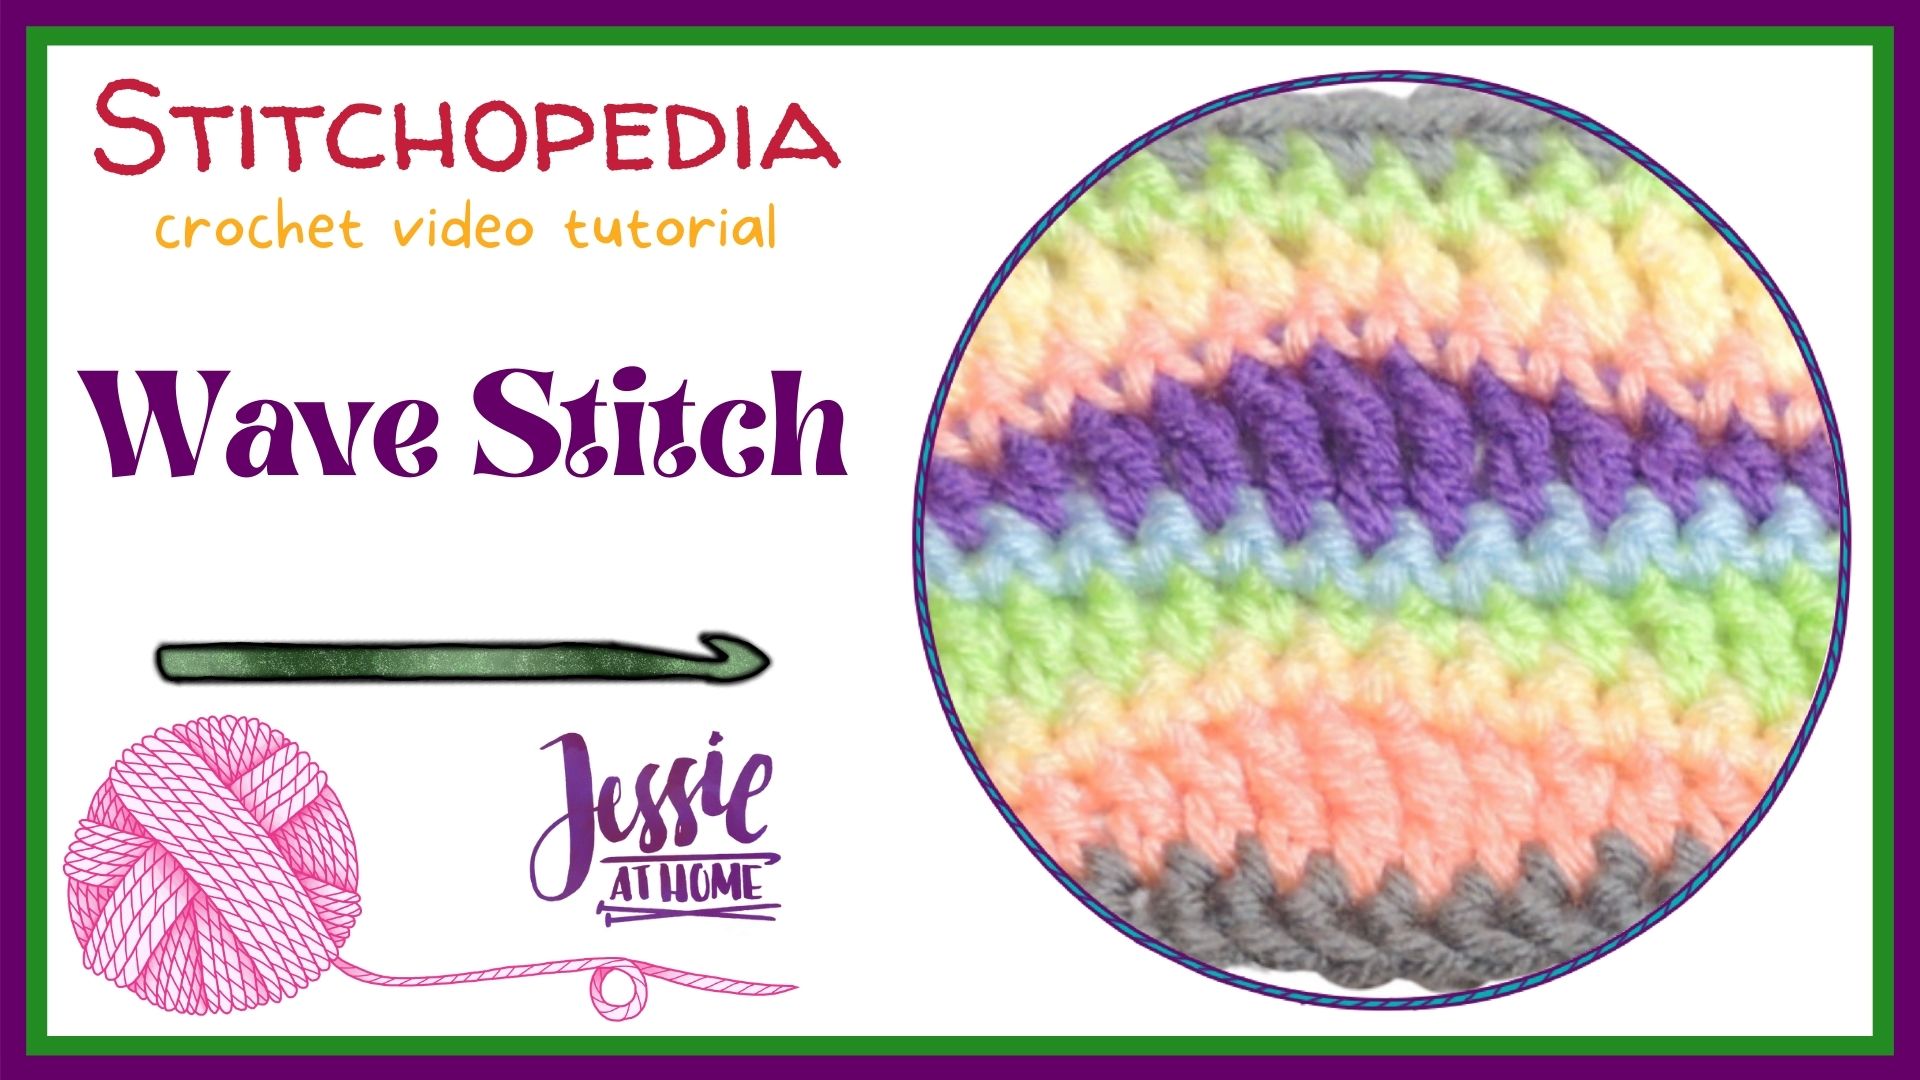 white rectangle with a circle on the right with an image of a crochet wave stitch swatch in pastels, and on the left there is text which reads "stitchopedia crochet video tutorial", "wave stitch", and "Jessie At Home"